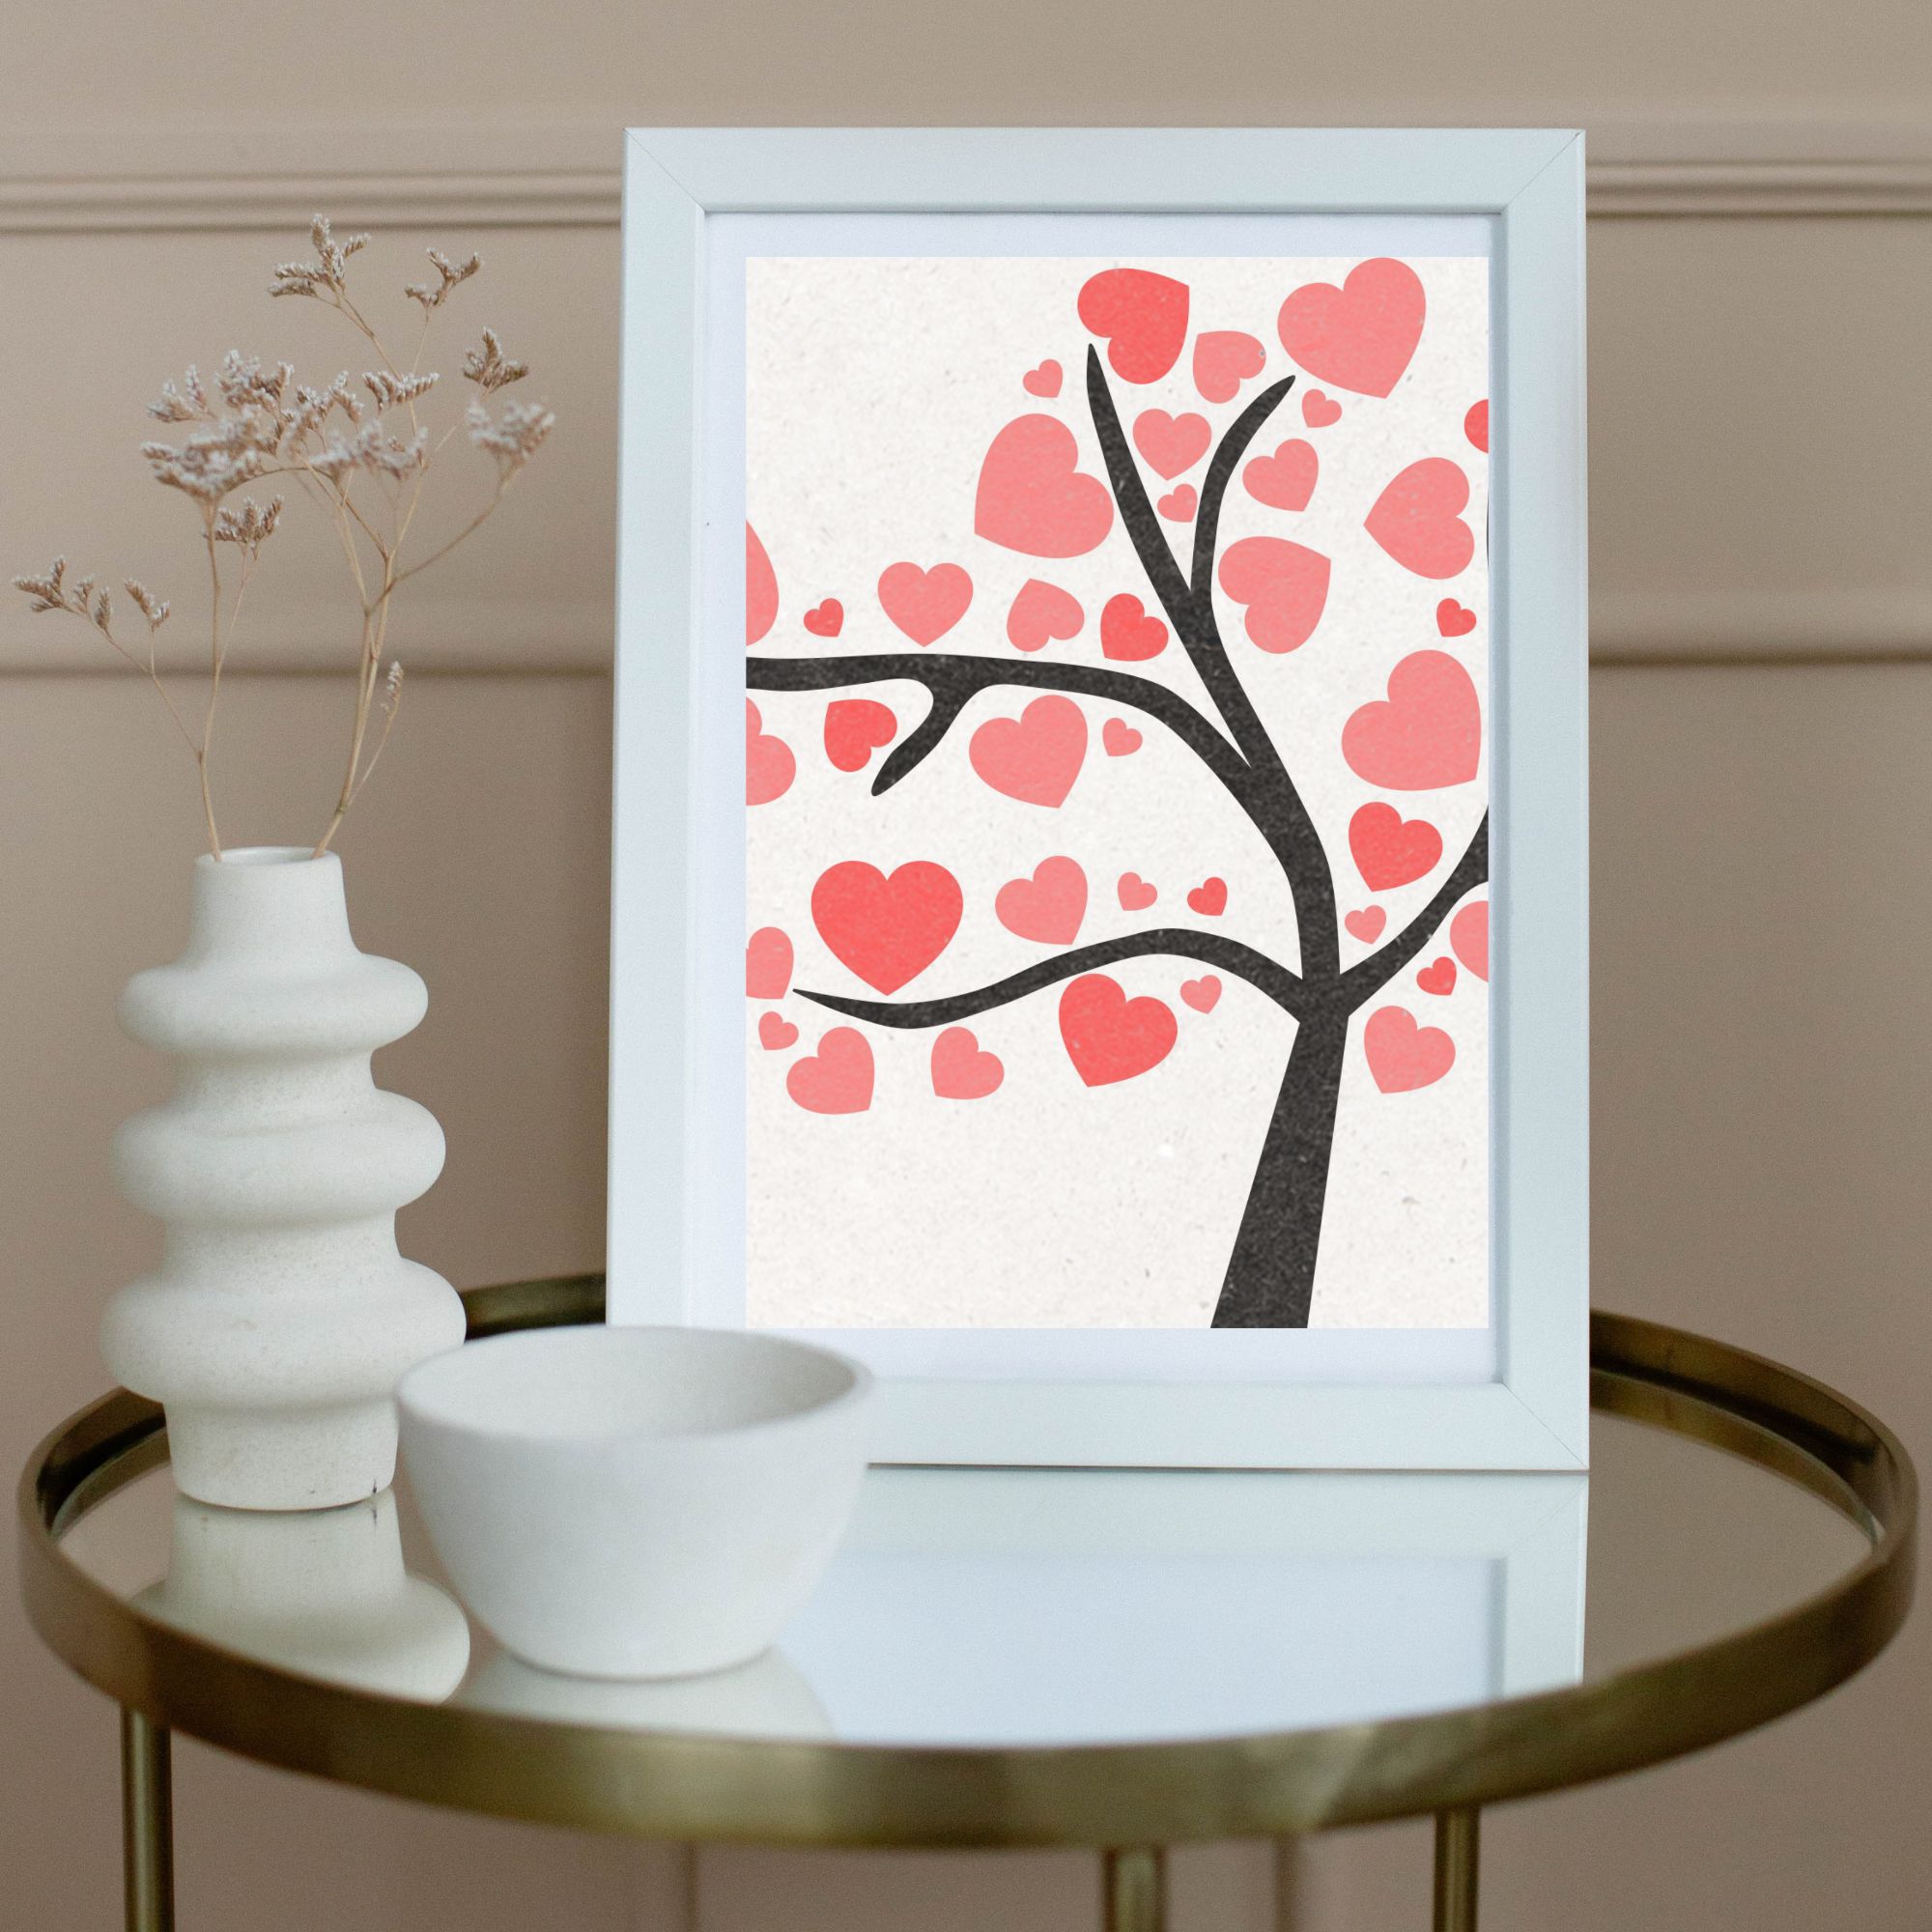 Valentines Day Printable Art cover image.